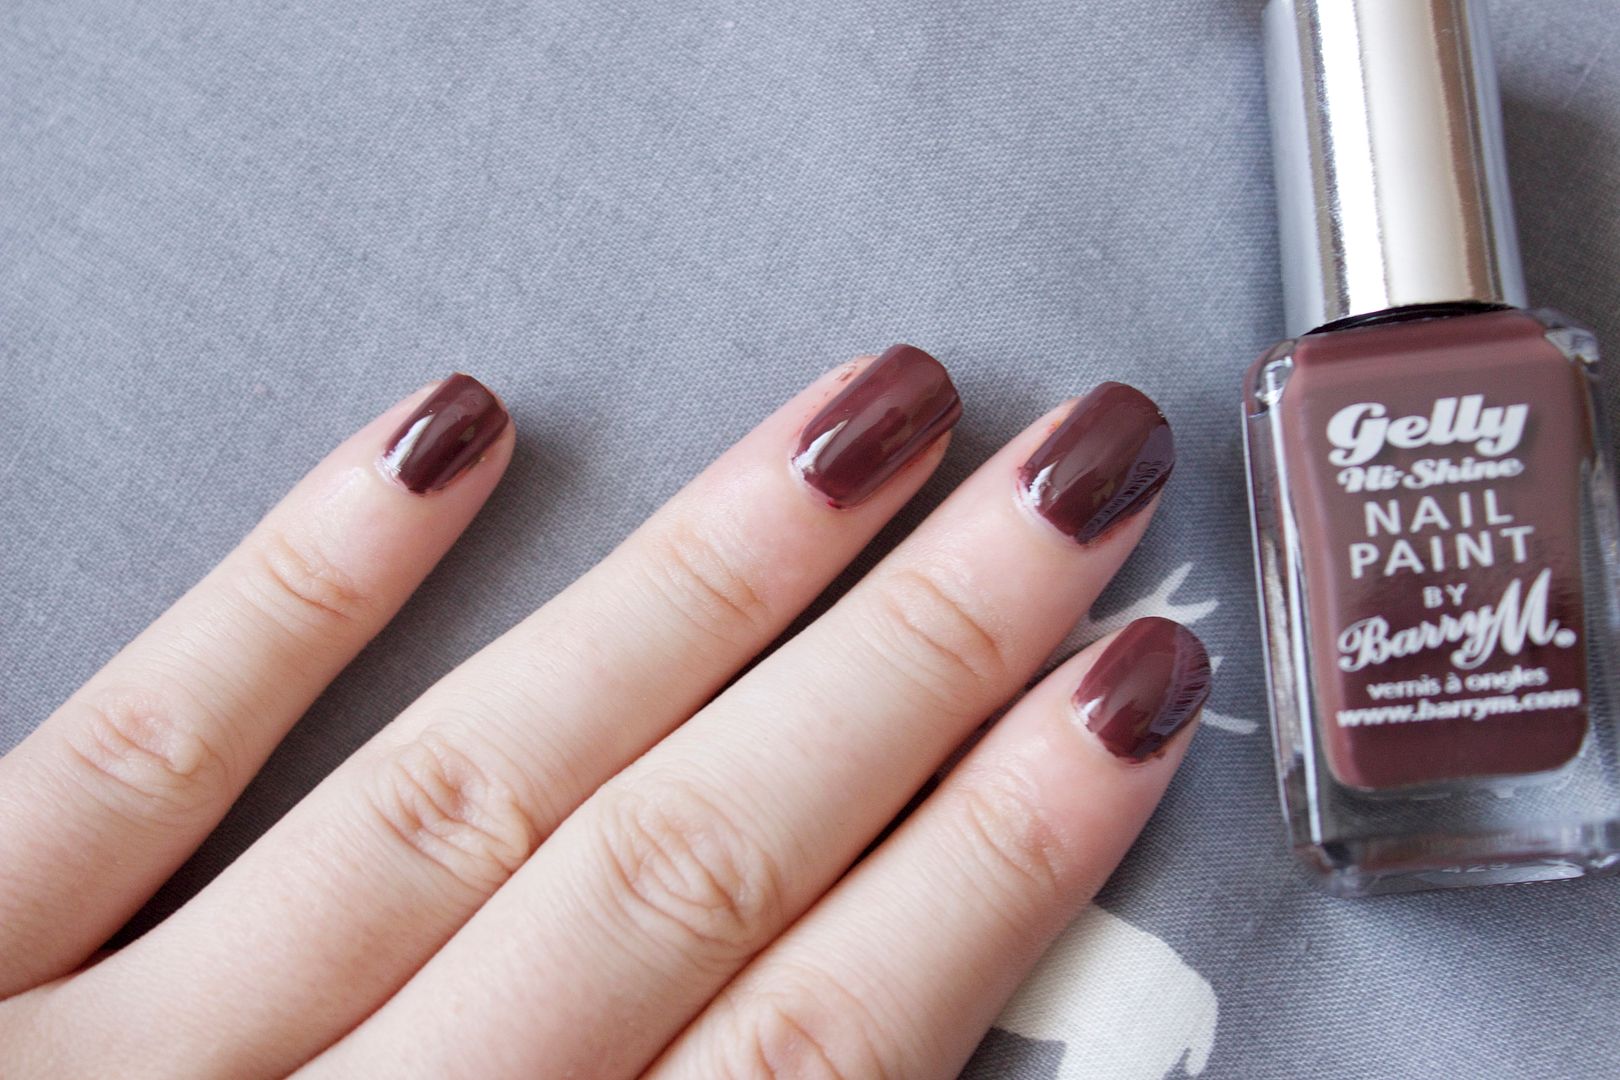 Barry M Autumn/Winter 2014 Gelly Nail Paint in Cocoa